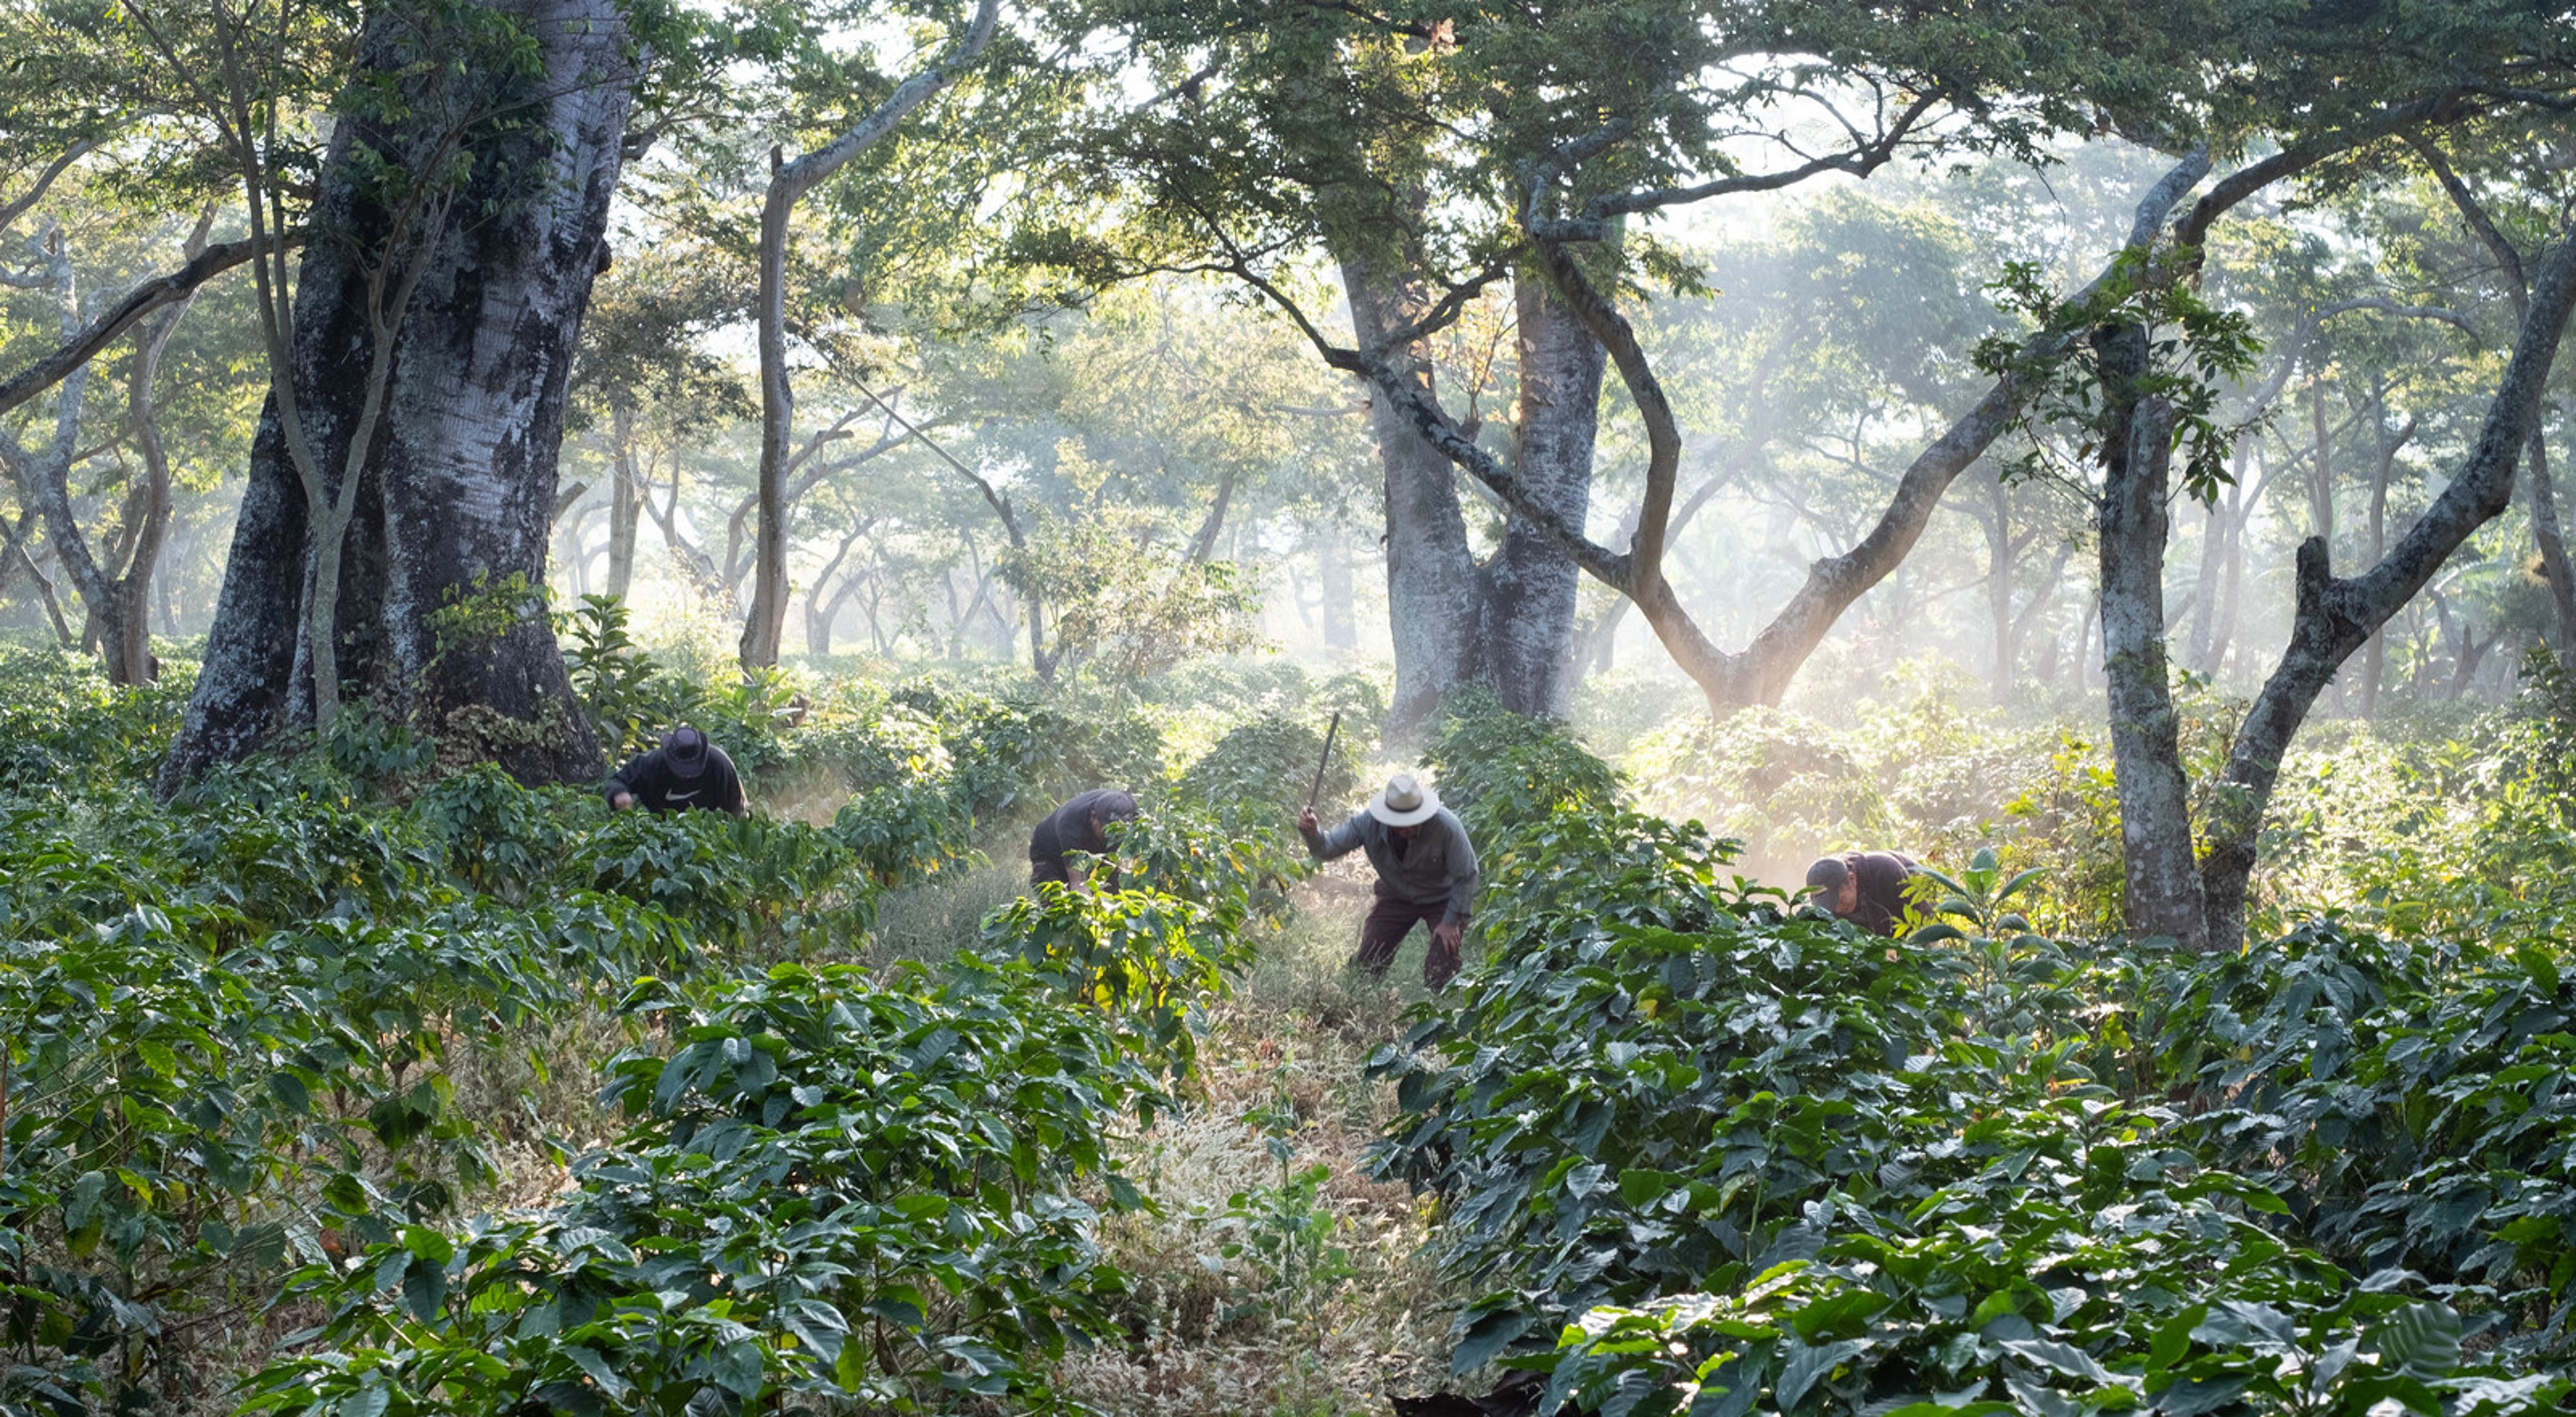 Workers clear undergrowth with machetes in shade-grown coffee crops on San Agustín Las Minas coffee plantation.